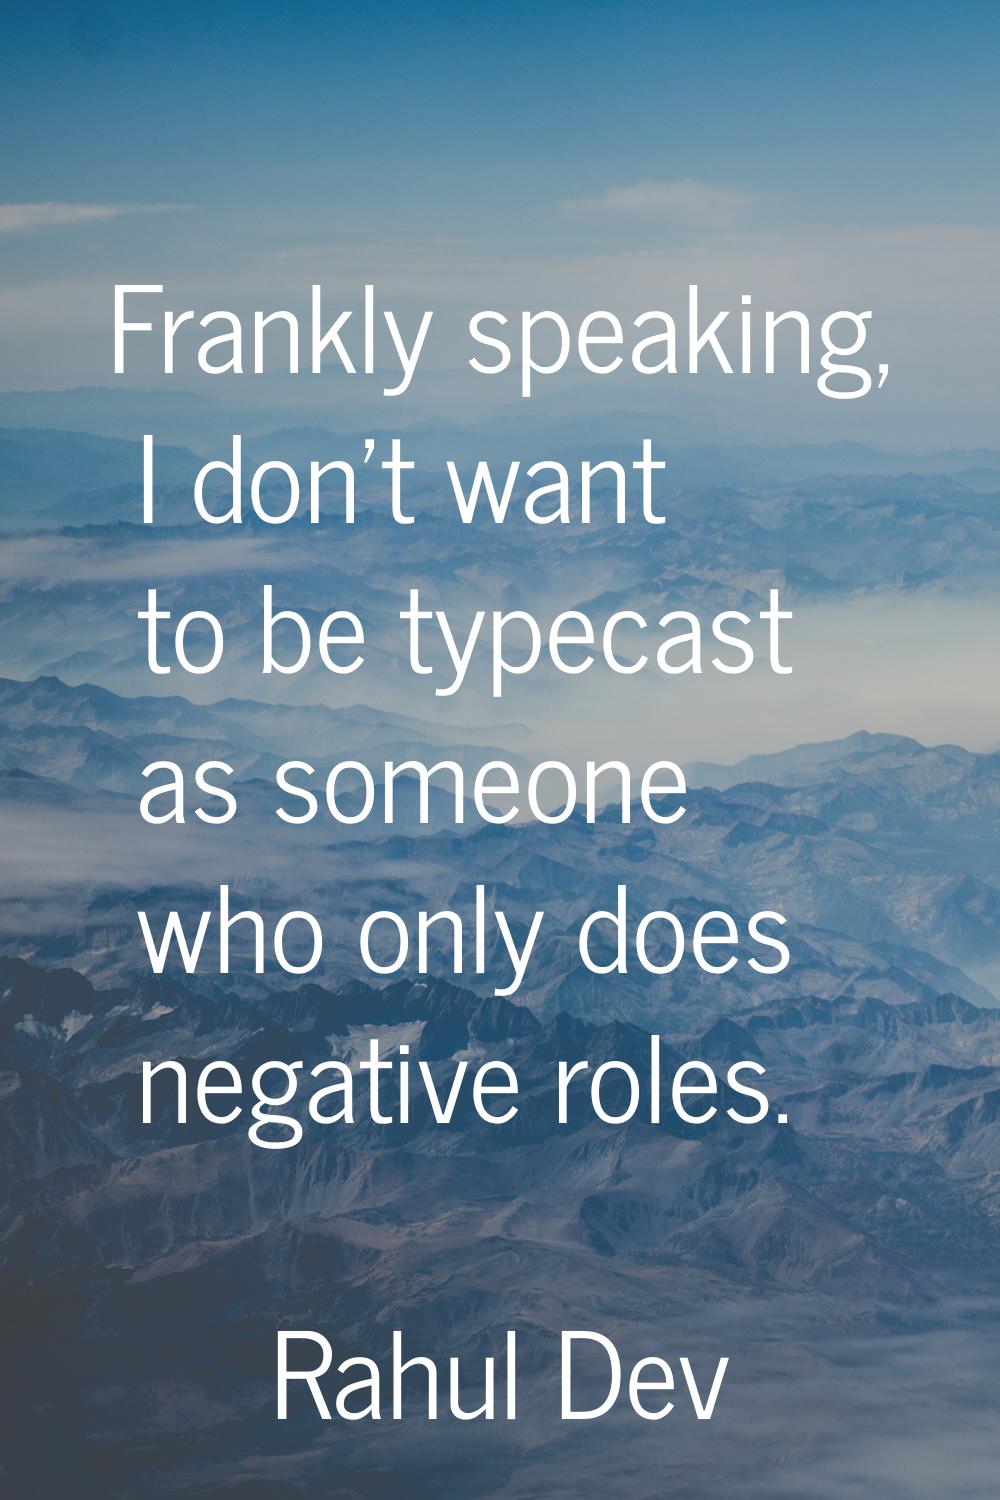 Frankly speaking, I don't want to be typecast as someone who only does negative roles.